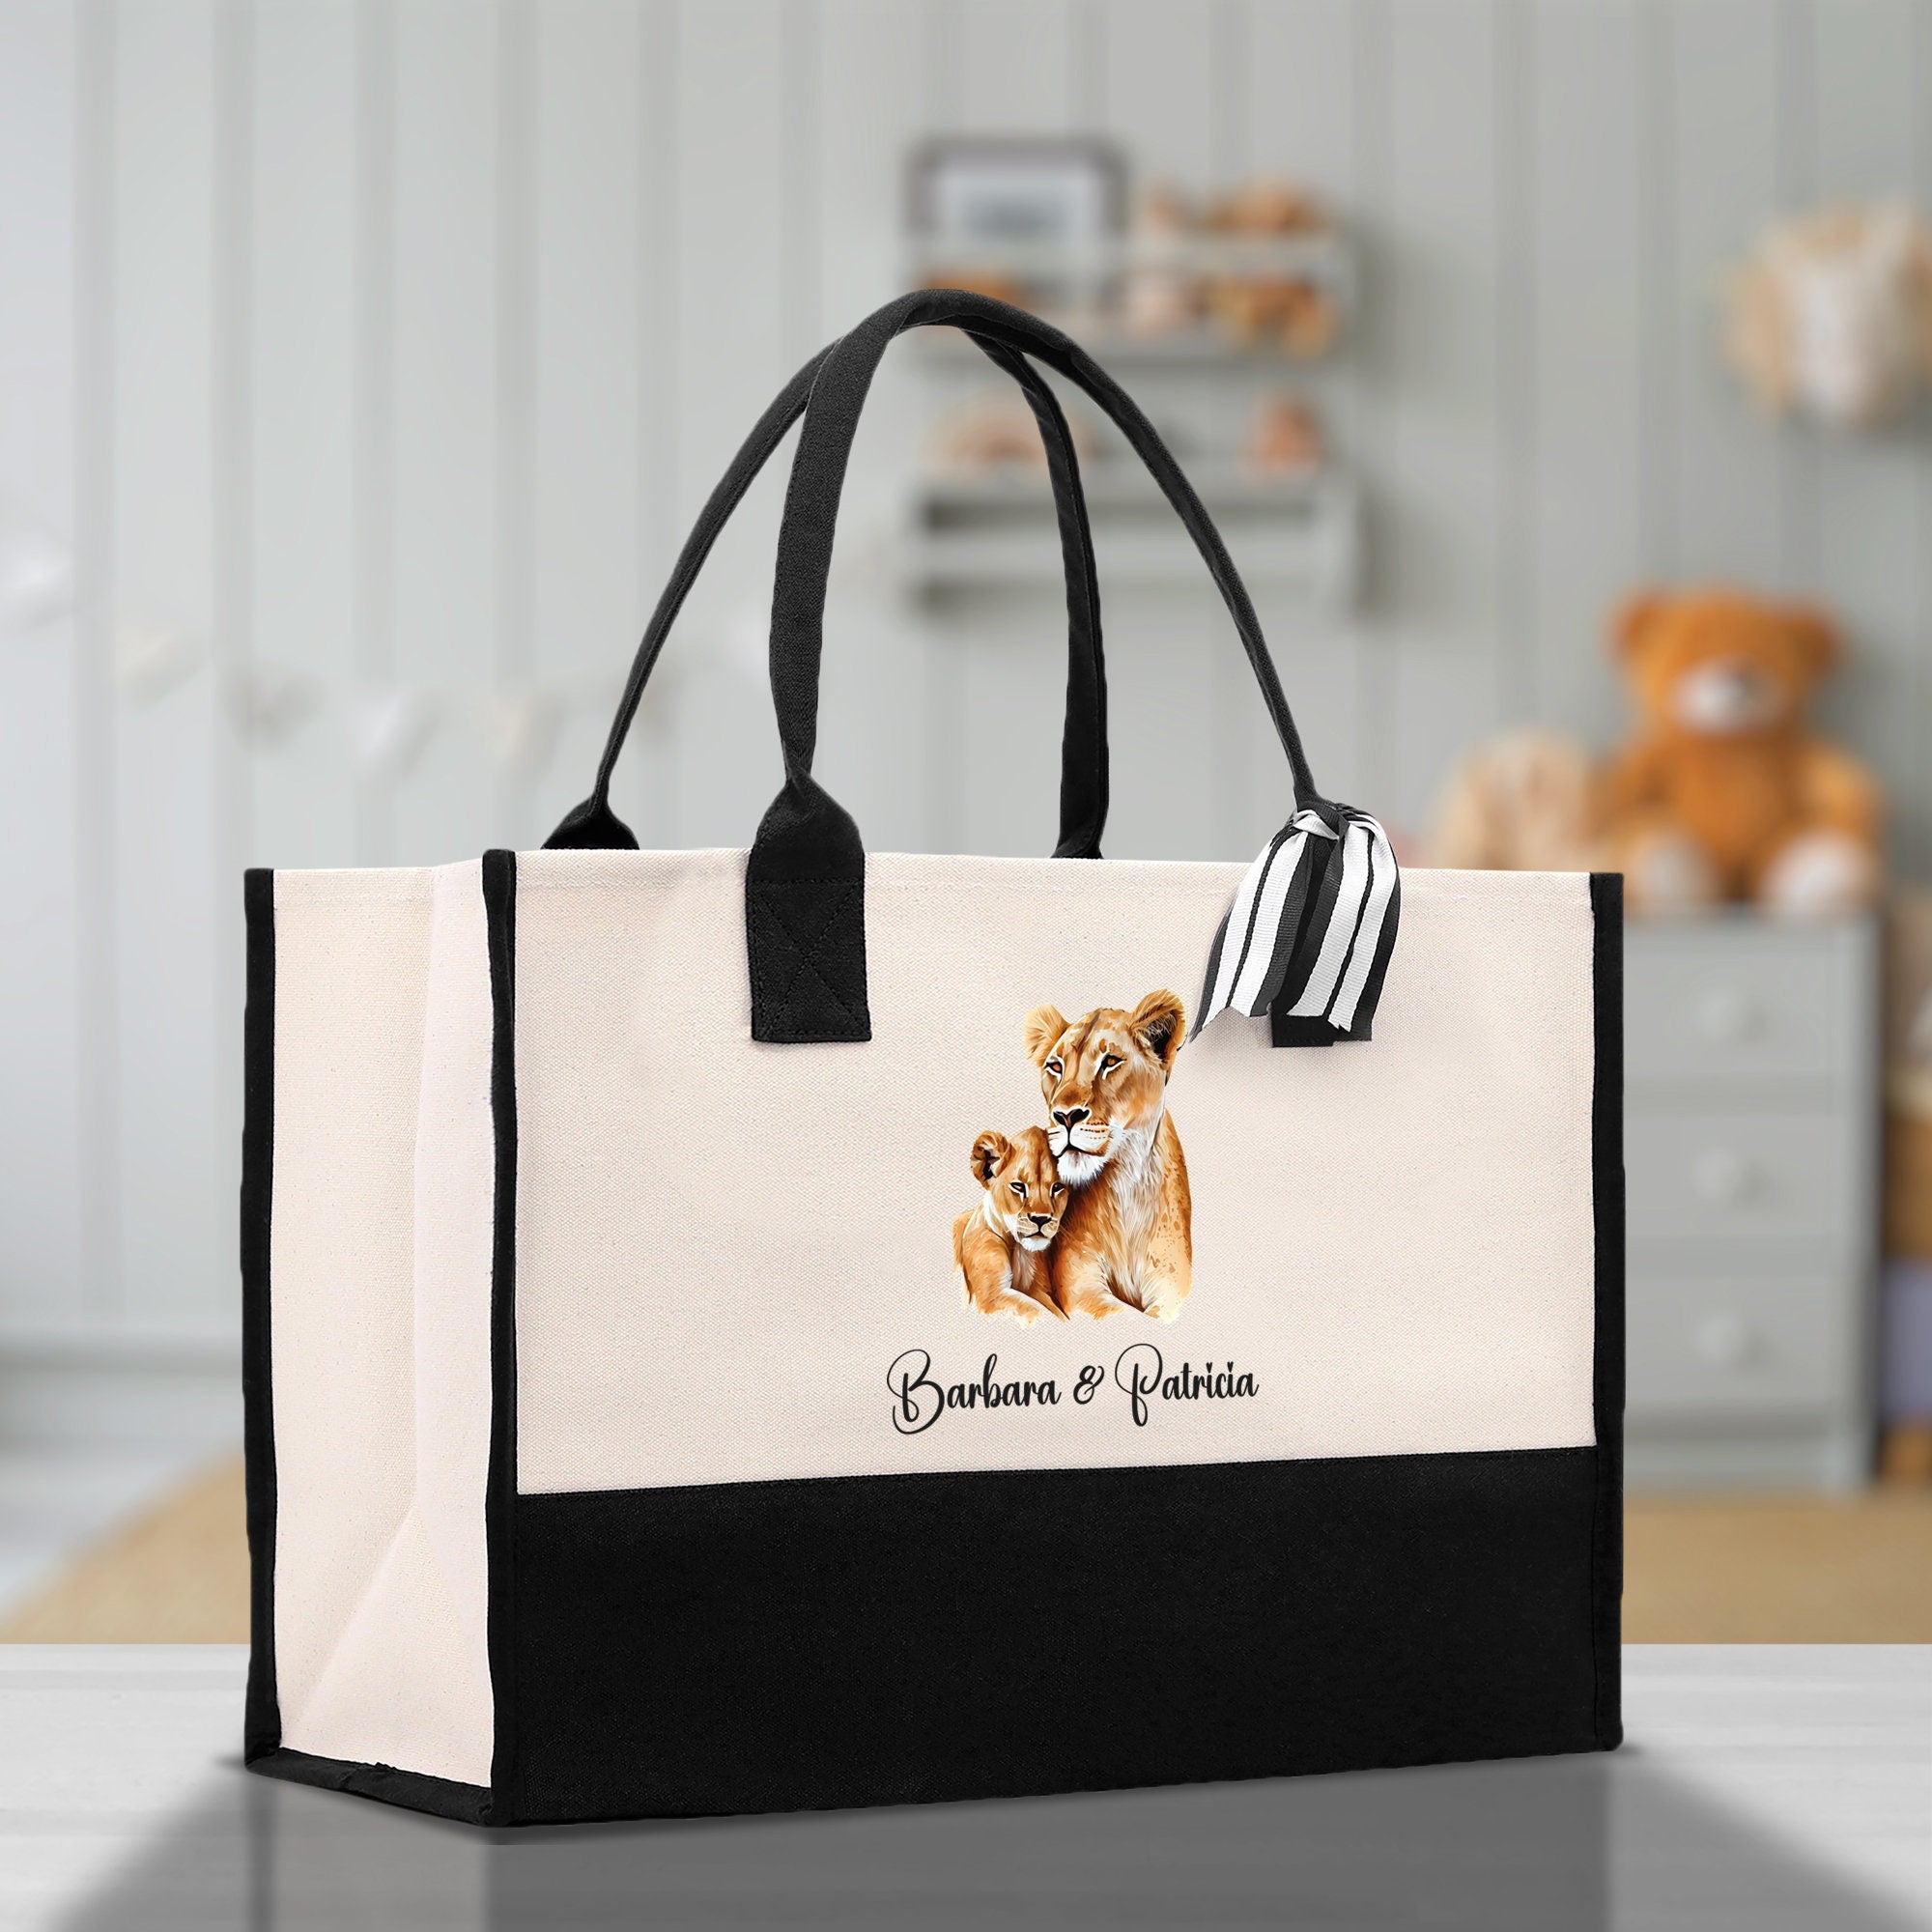 Lion Mom And Baby Name Custom Cotton Canvas Tote Bag Custom Pet Lover Gift Pet Portrait Bag Personalized Pet Owner Gift Tote Bag